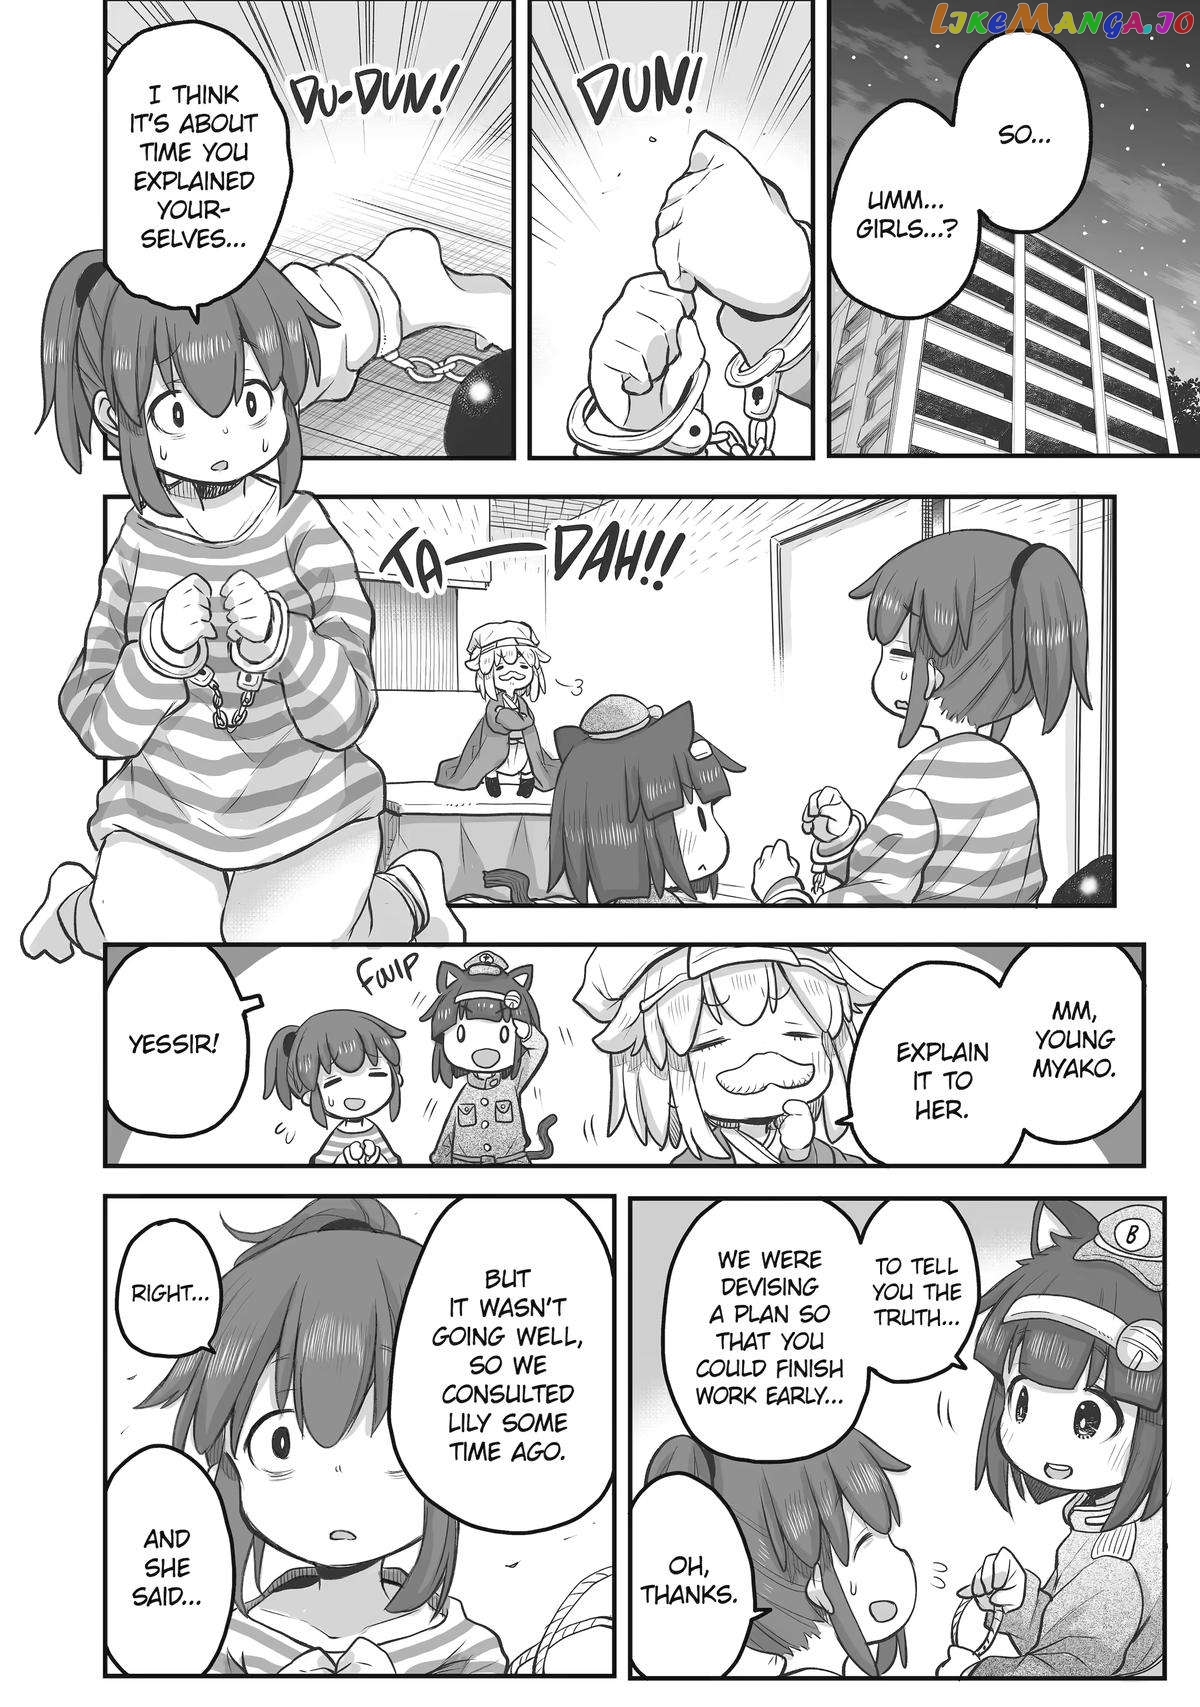 Ms. Corporate Slave Wants to be Healed by a Loli Spirit - chapter 63 - #4